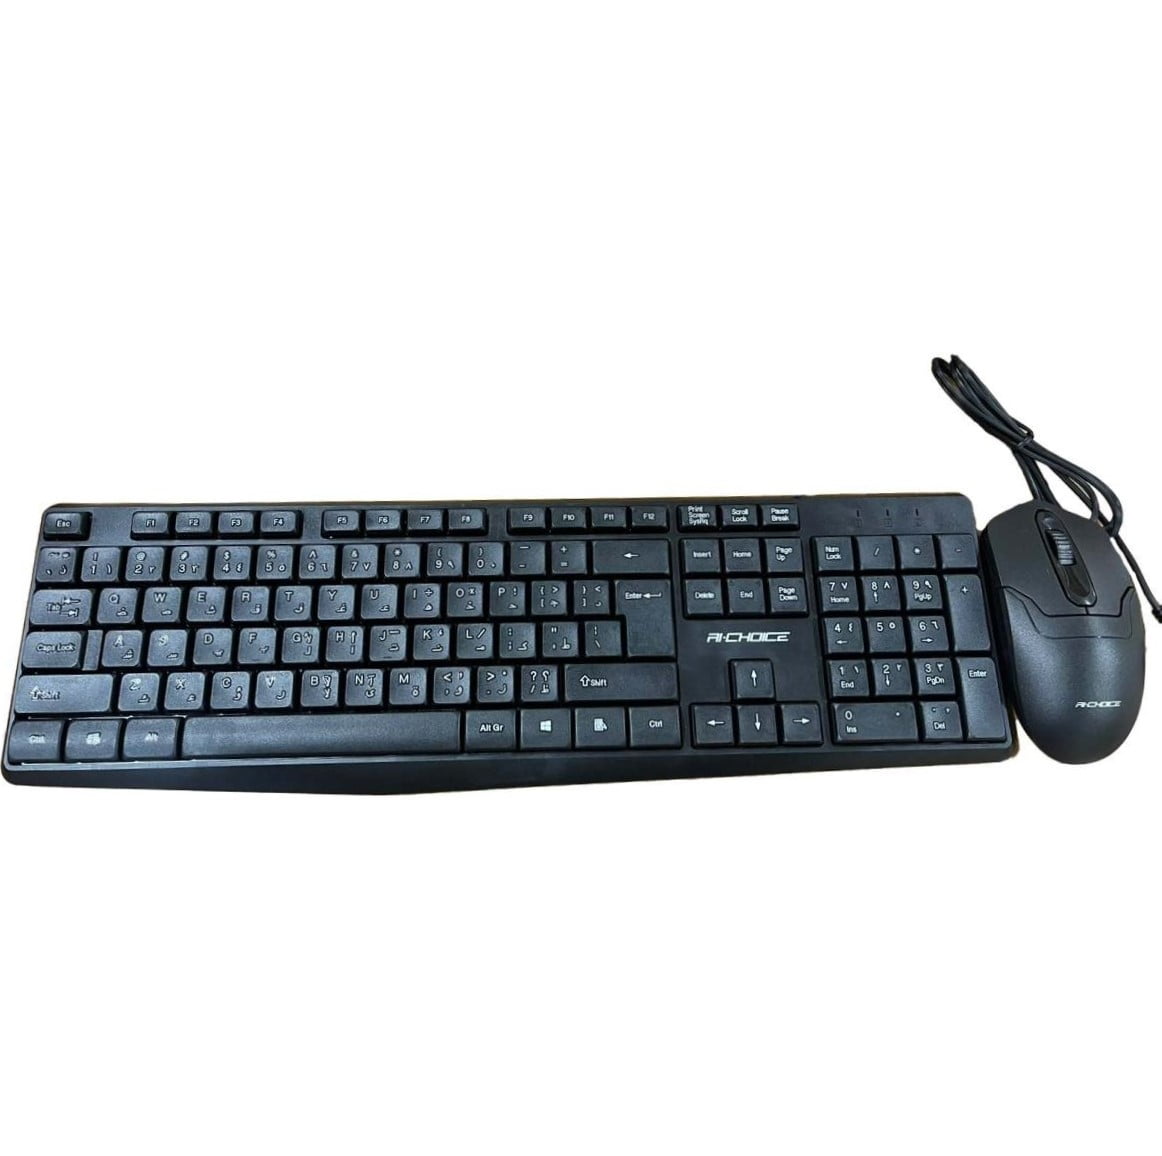 RI-Choice KM1000 Wired Keyboard And Mouse Combo